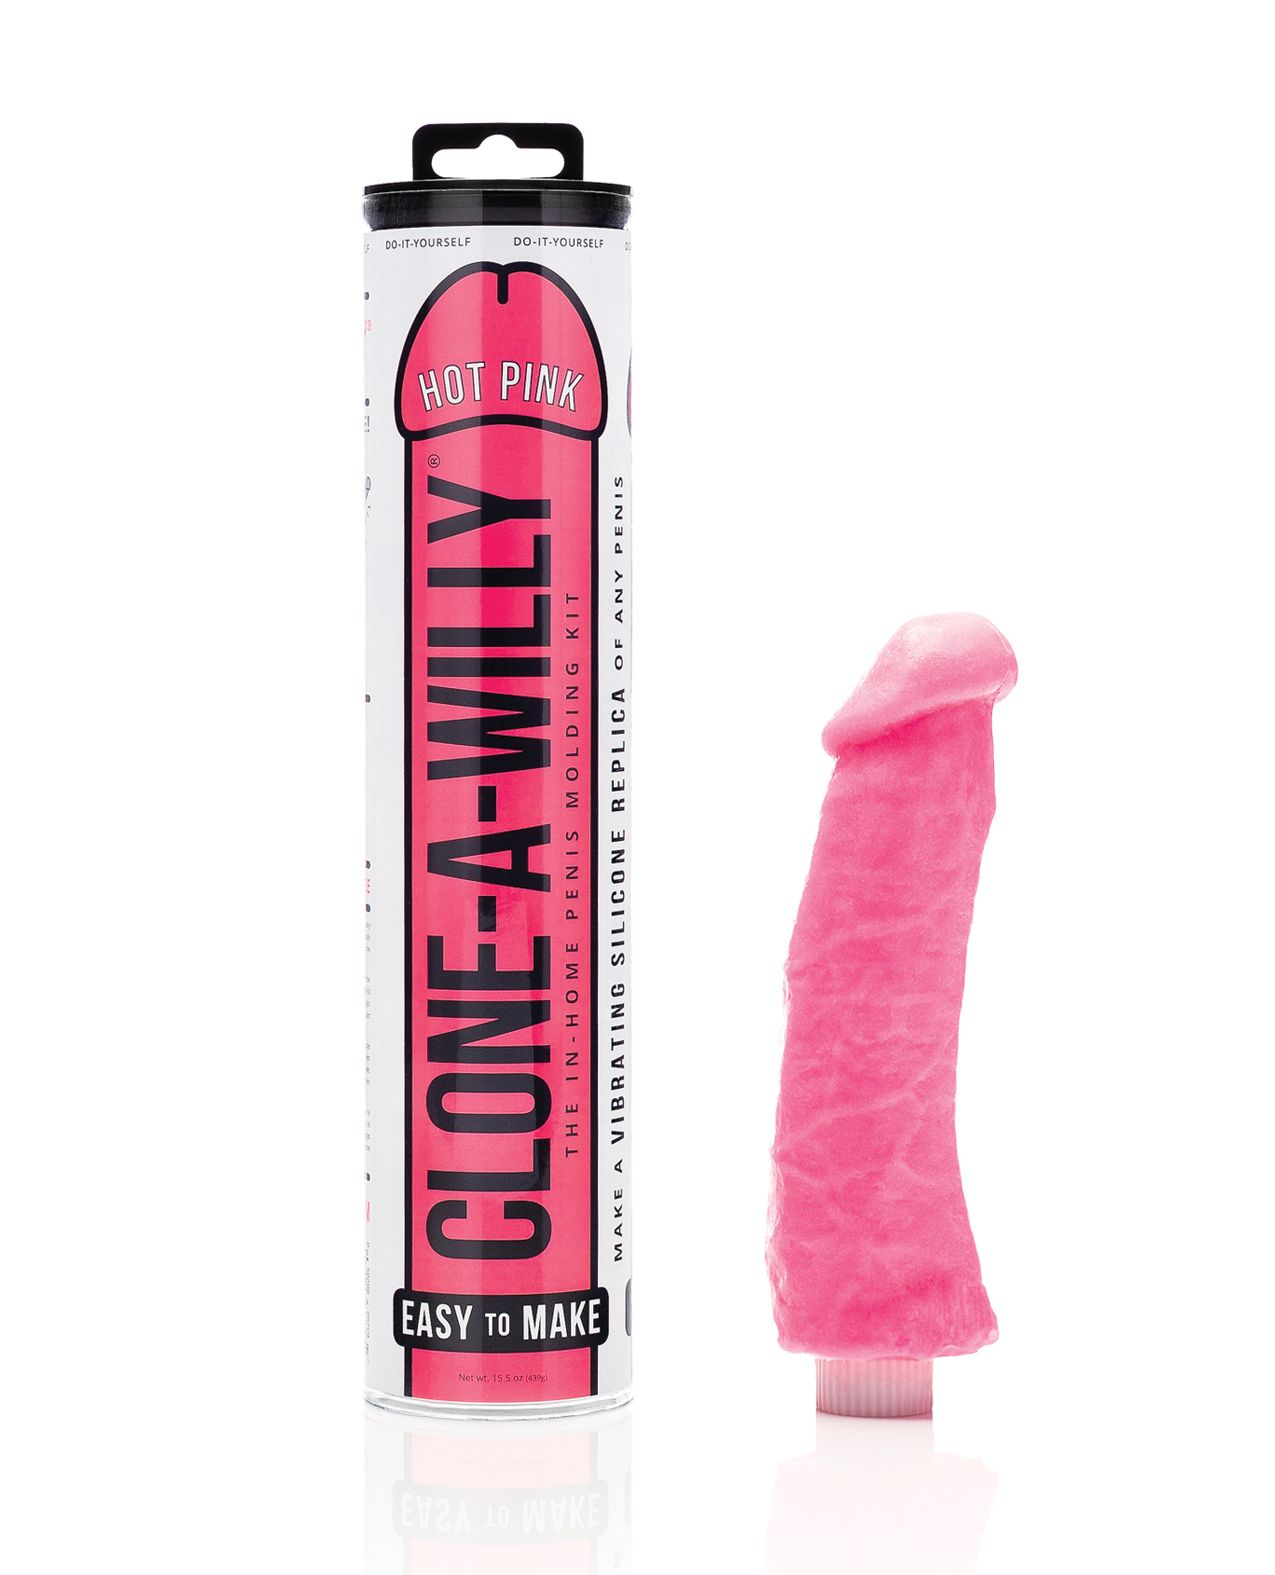 Clone-A-Willy Vibrating Kit